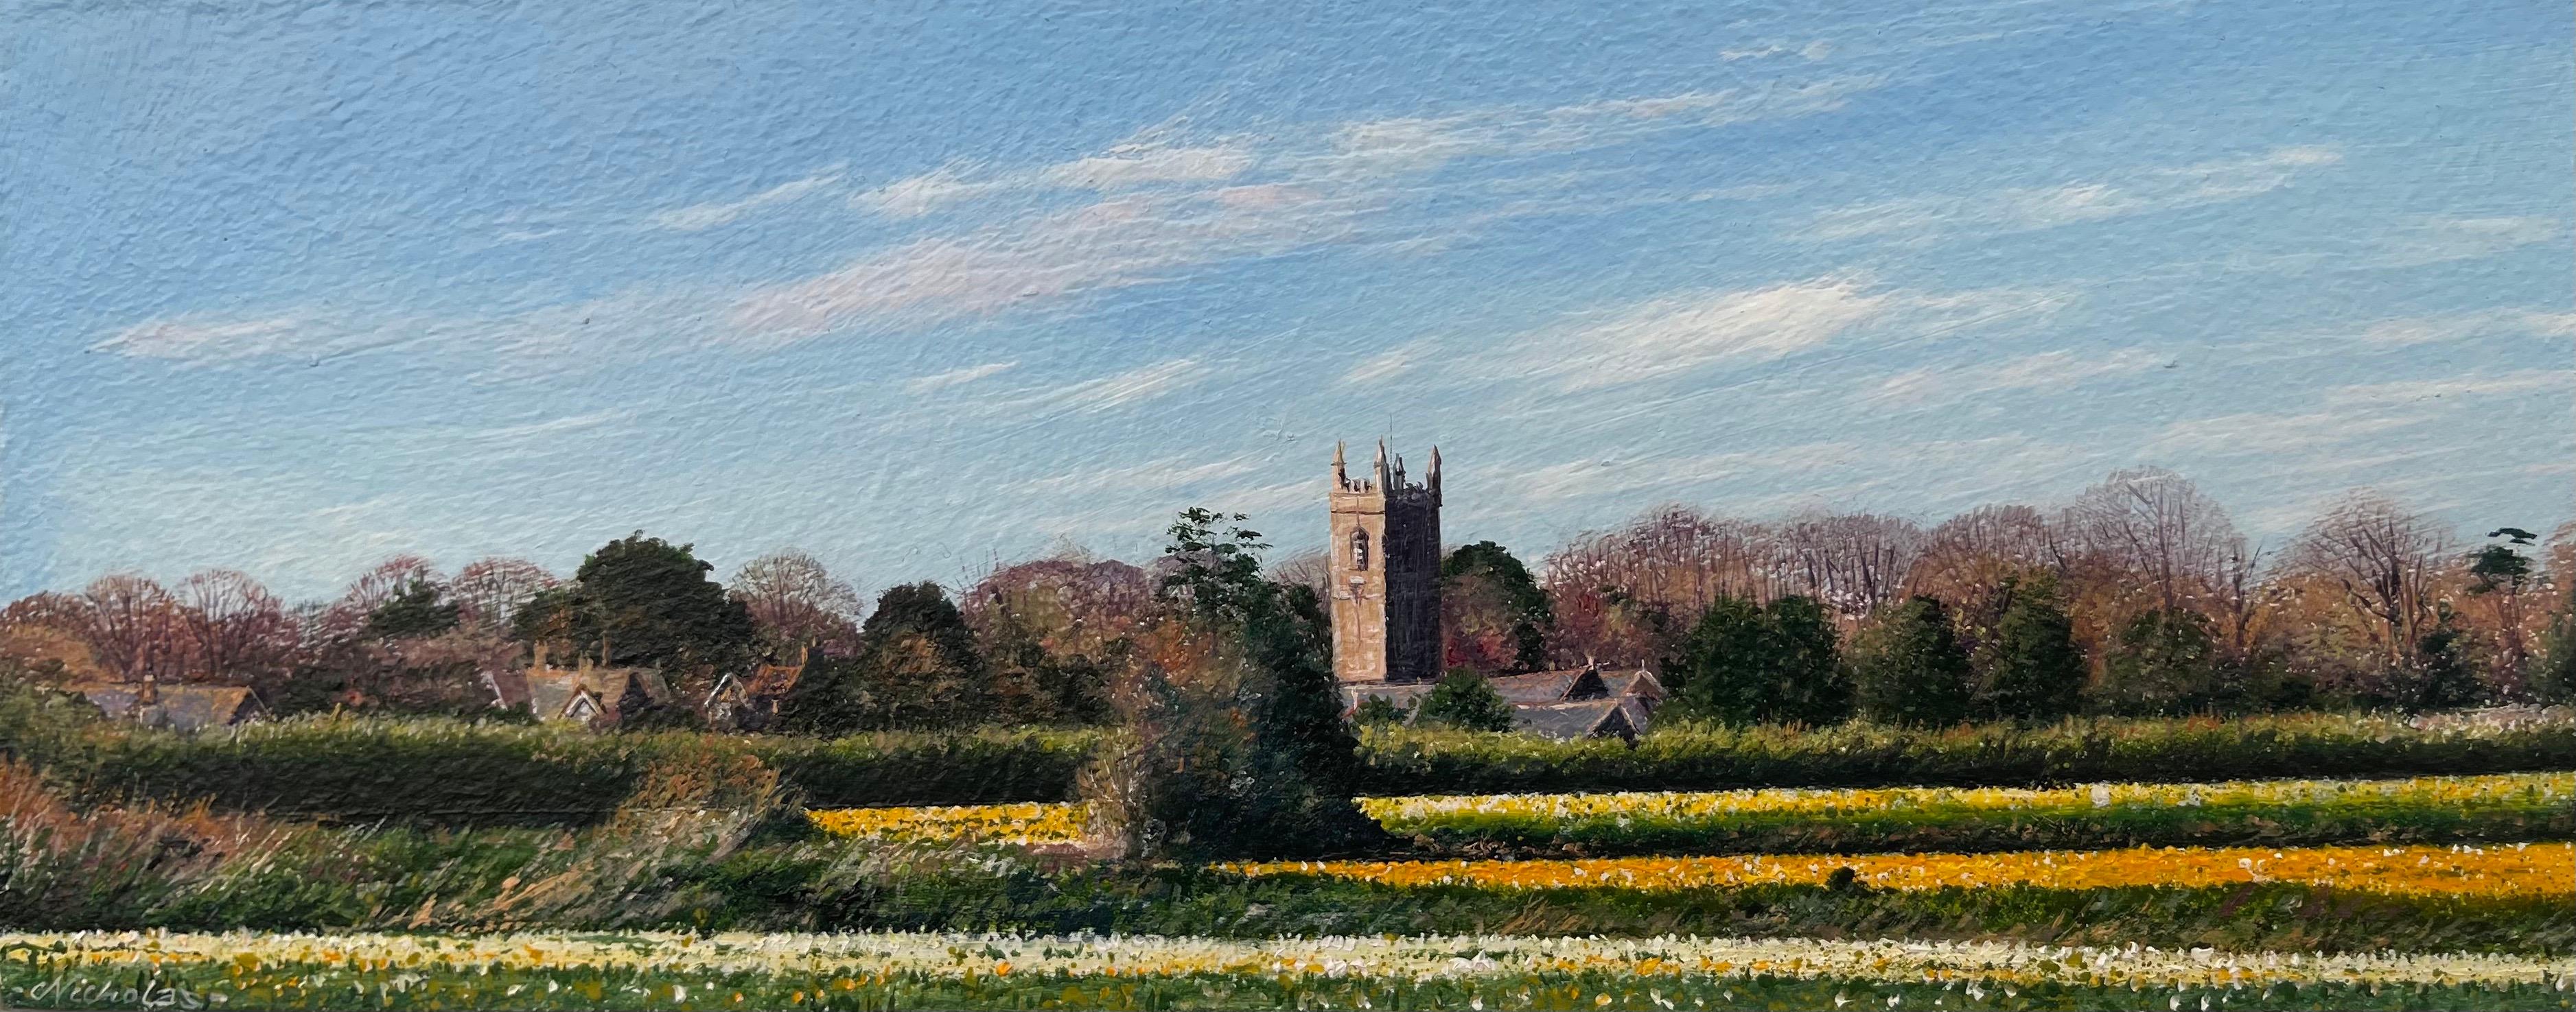 Daffodil Fields English Landscape Painting by Contemporary Photorealist Artist For Sale 1